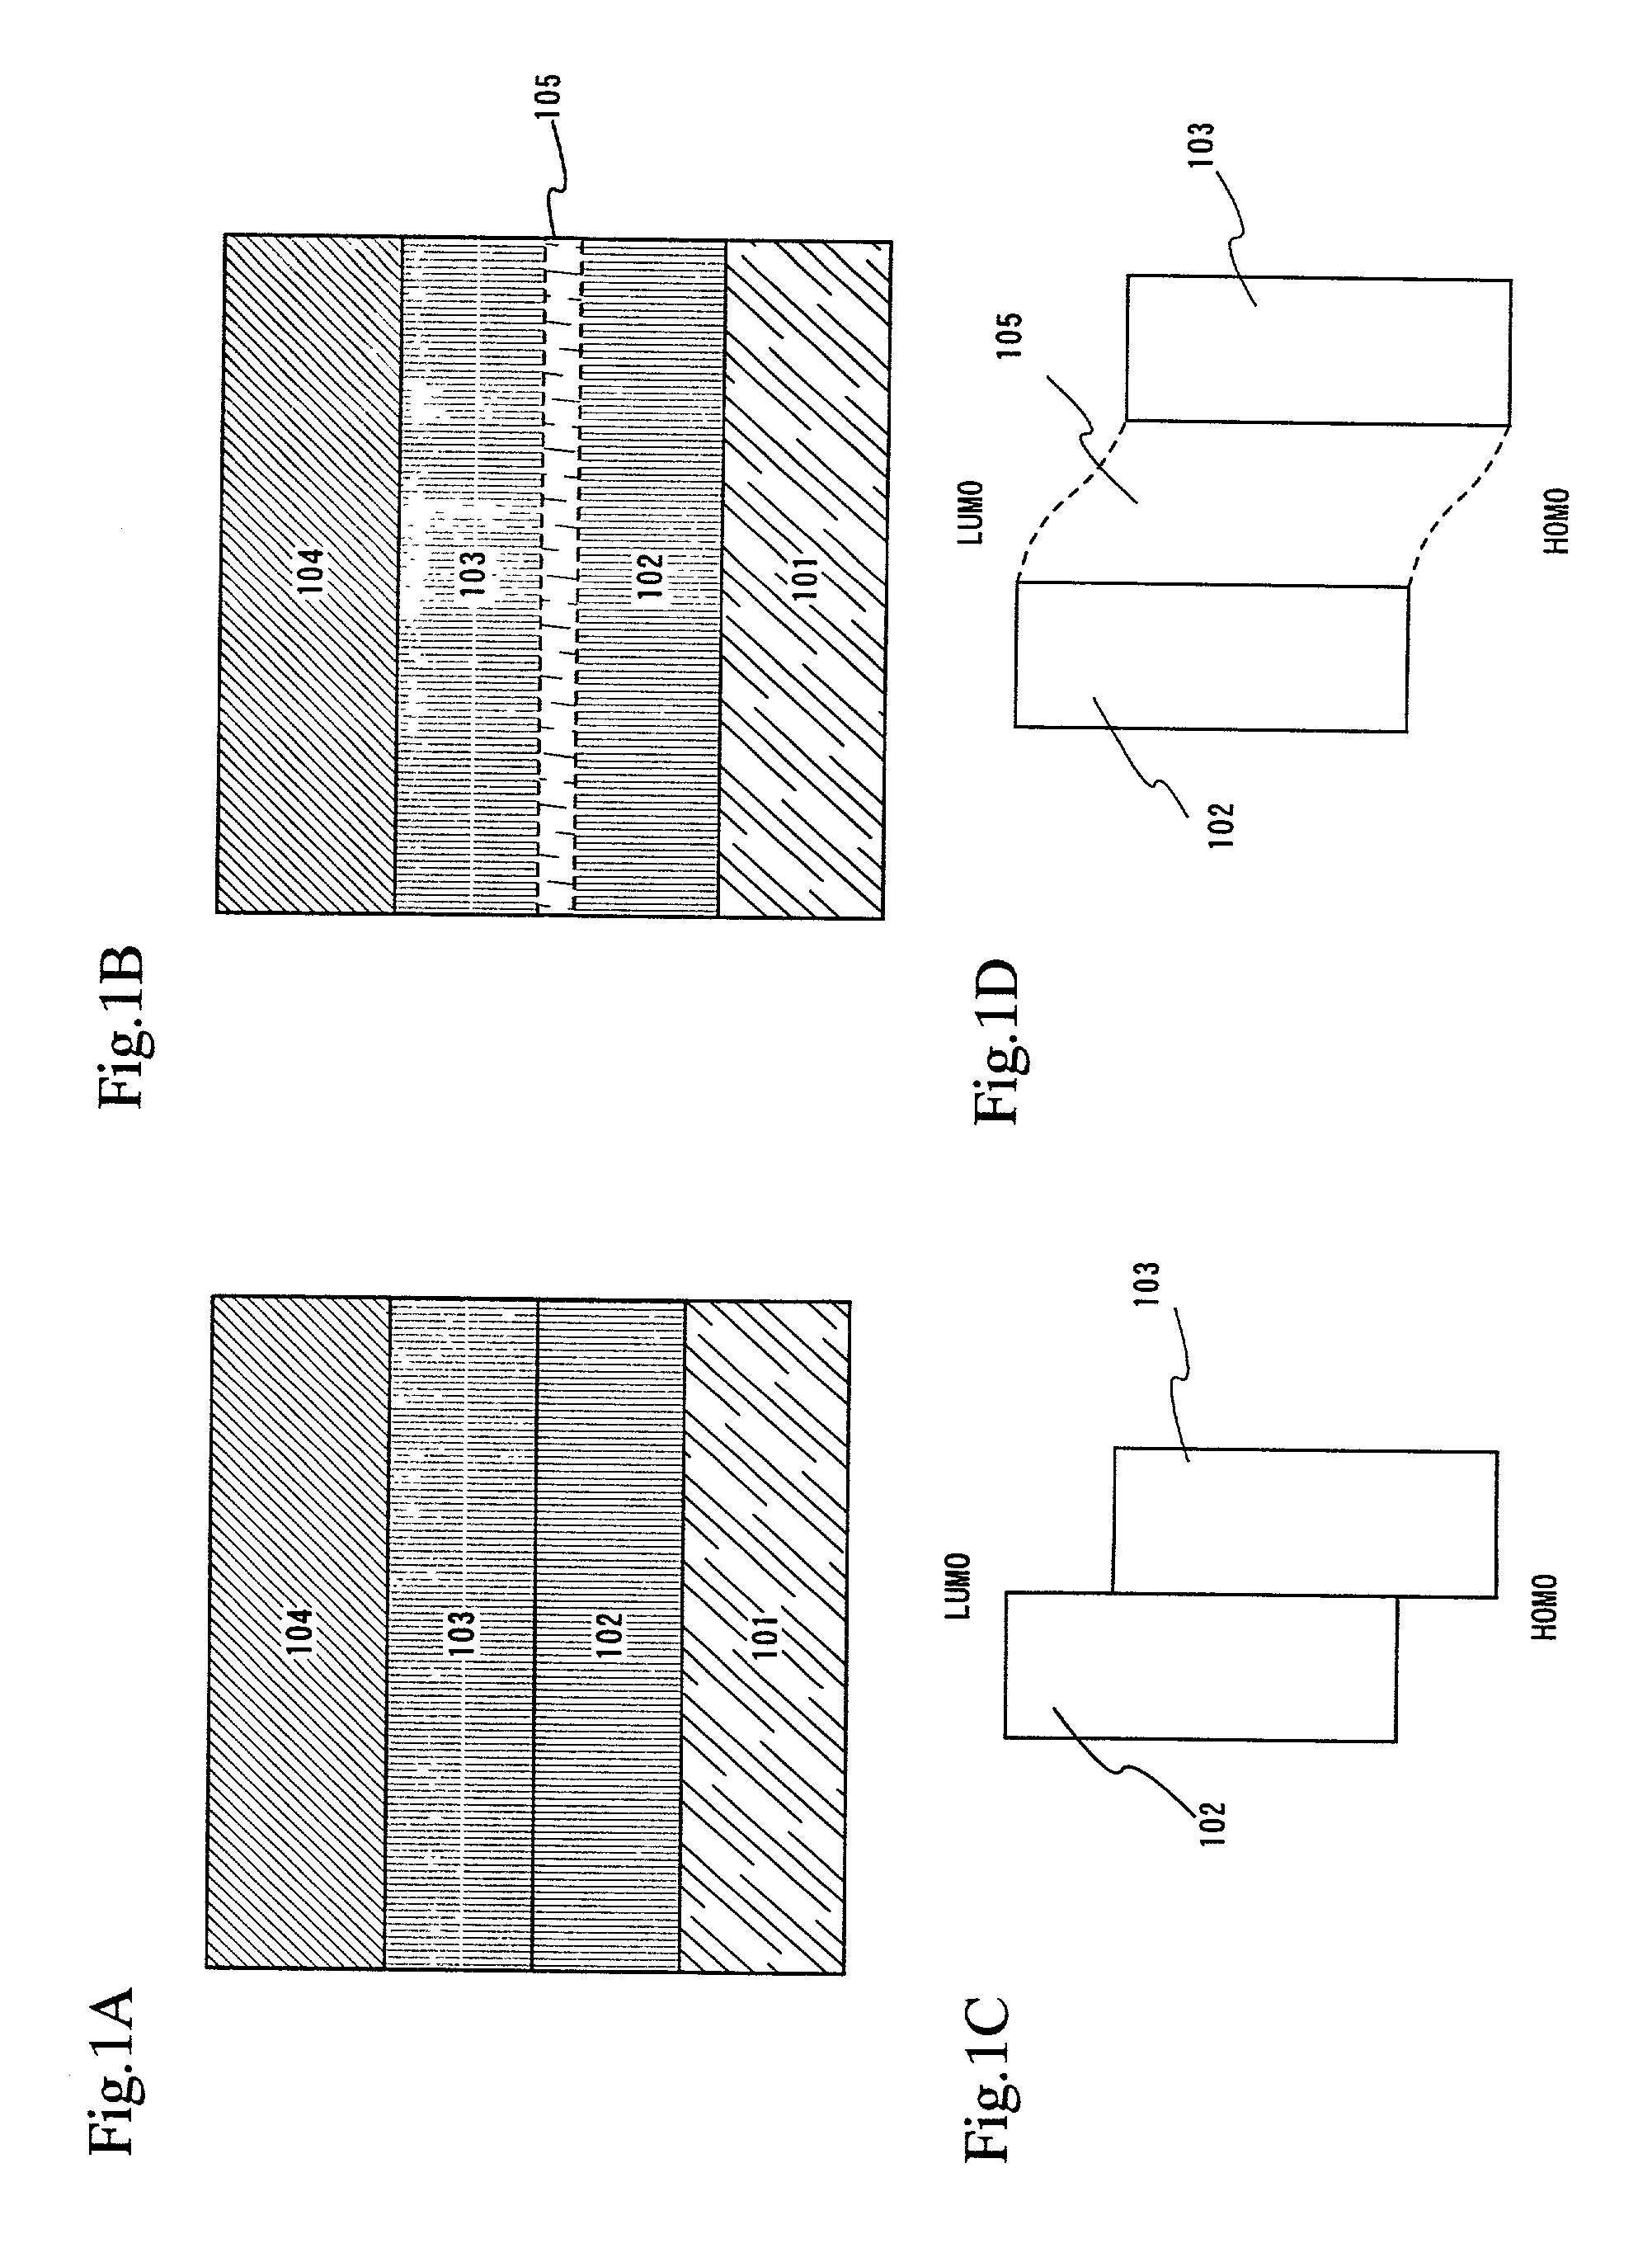 Light emitting device having organic light emitting material with mixed layer